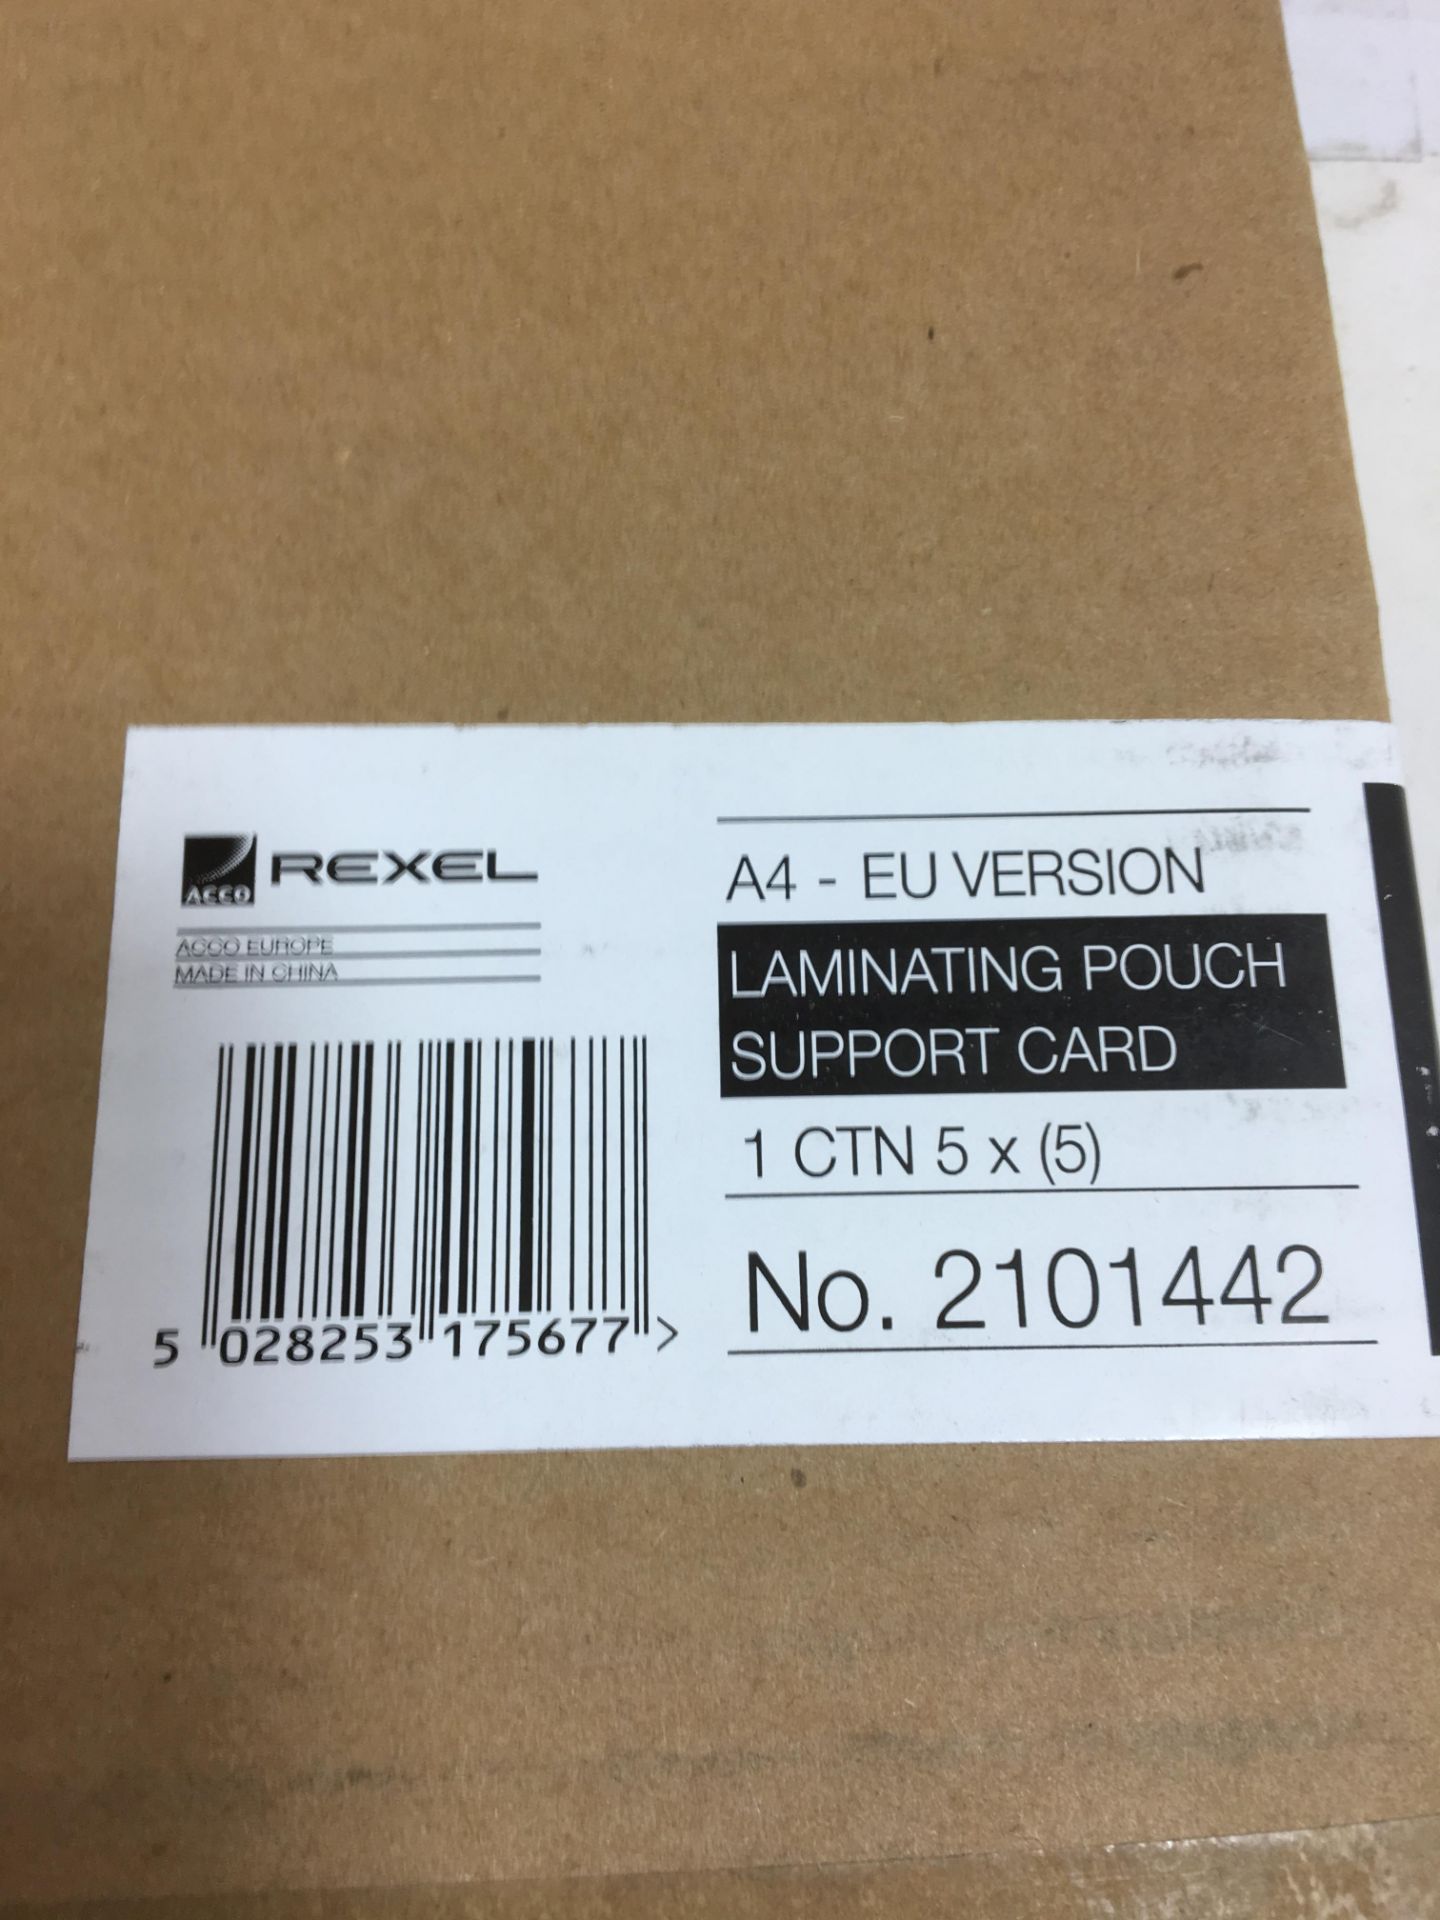 5 x Rexel A4 Laminating Pouches Support Cards. - Image 3 of 4